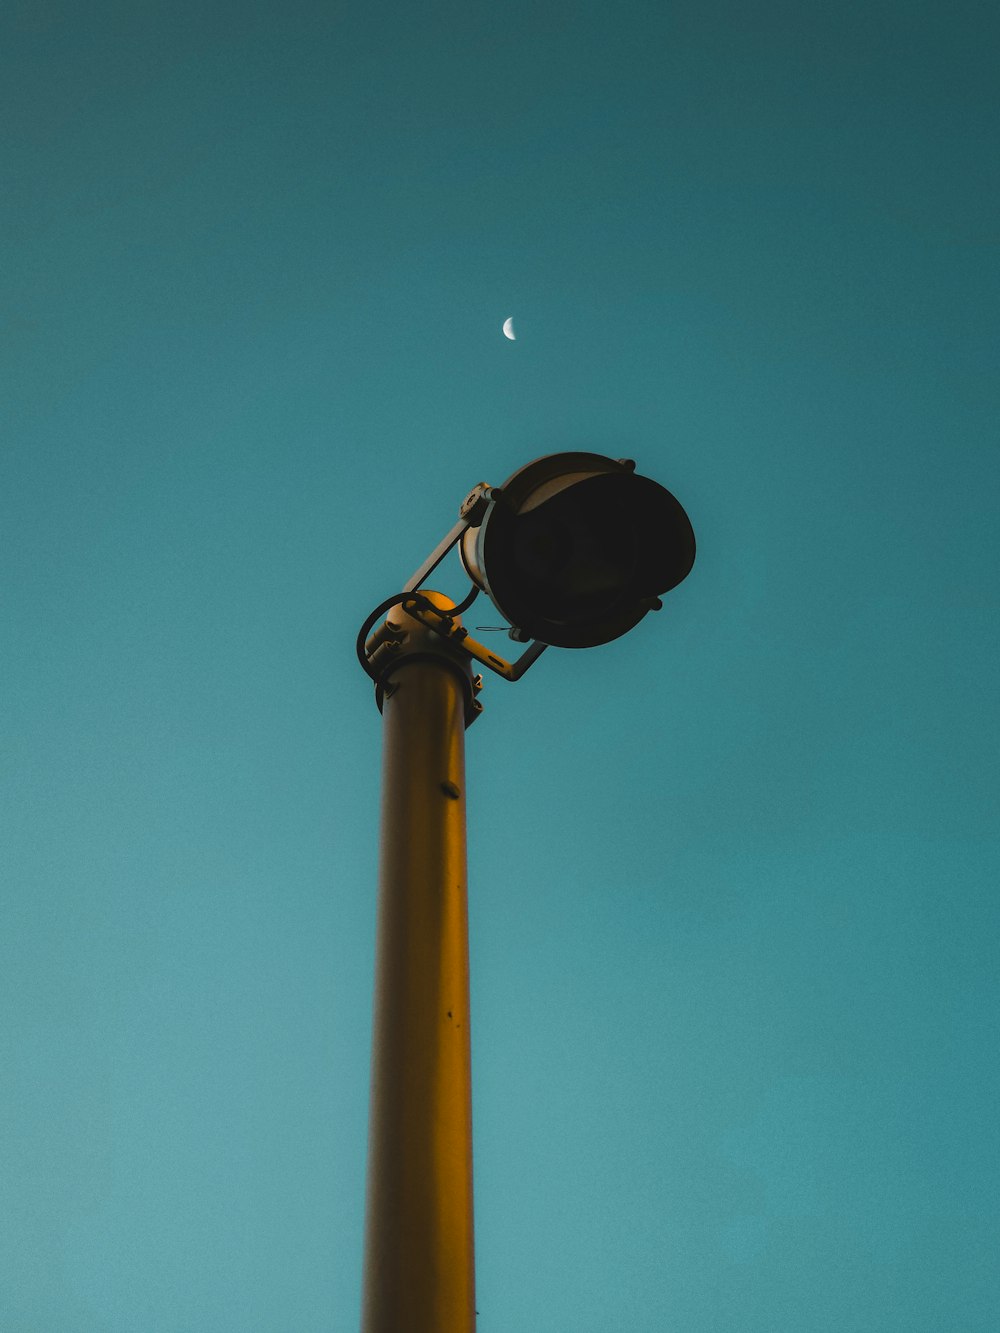 a street light with a half moon in the sky